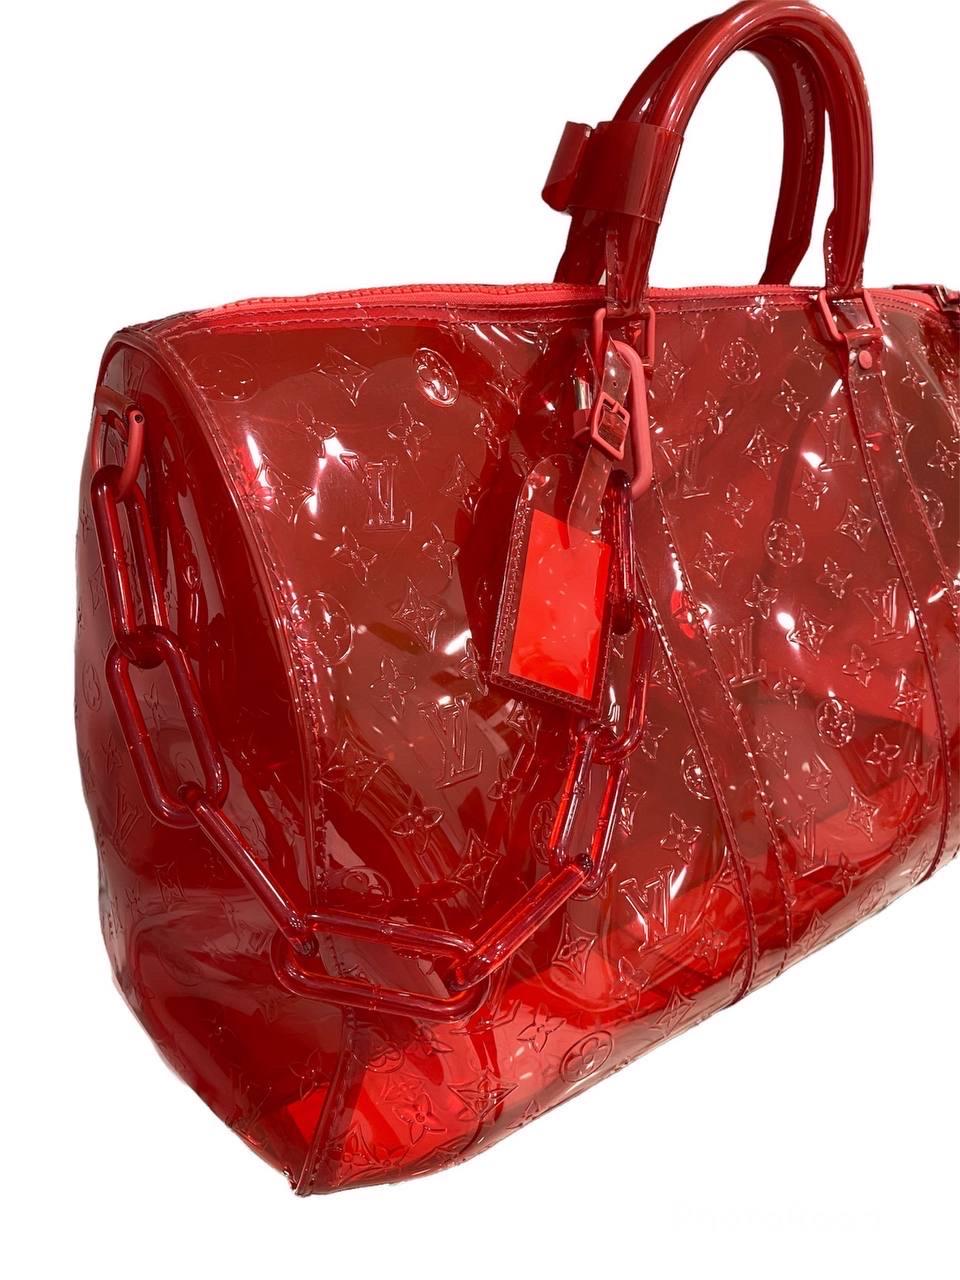 Louis Vuitton x Virgil Abloh Keepall Bandouliere 50 Limited Edition SS19 iconic bag in embossed transparent red PVC Monogram with silver hardware.

It has a central opening with a zip closure equipped with a special padlock with keys. Very large